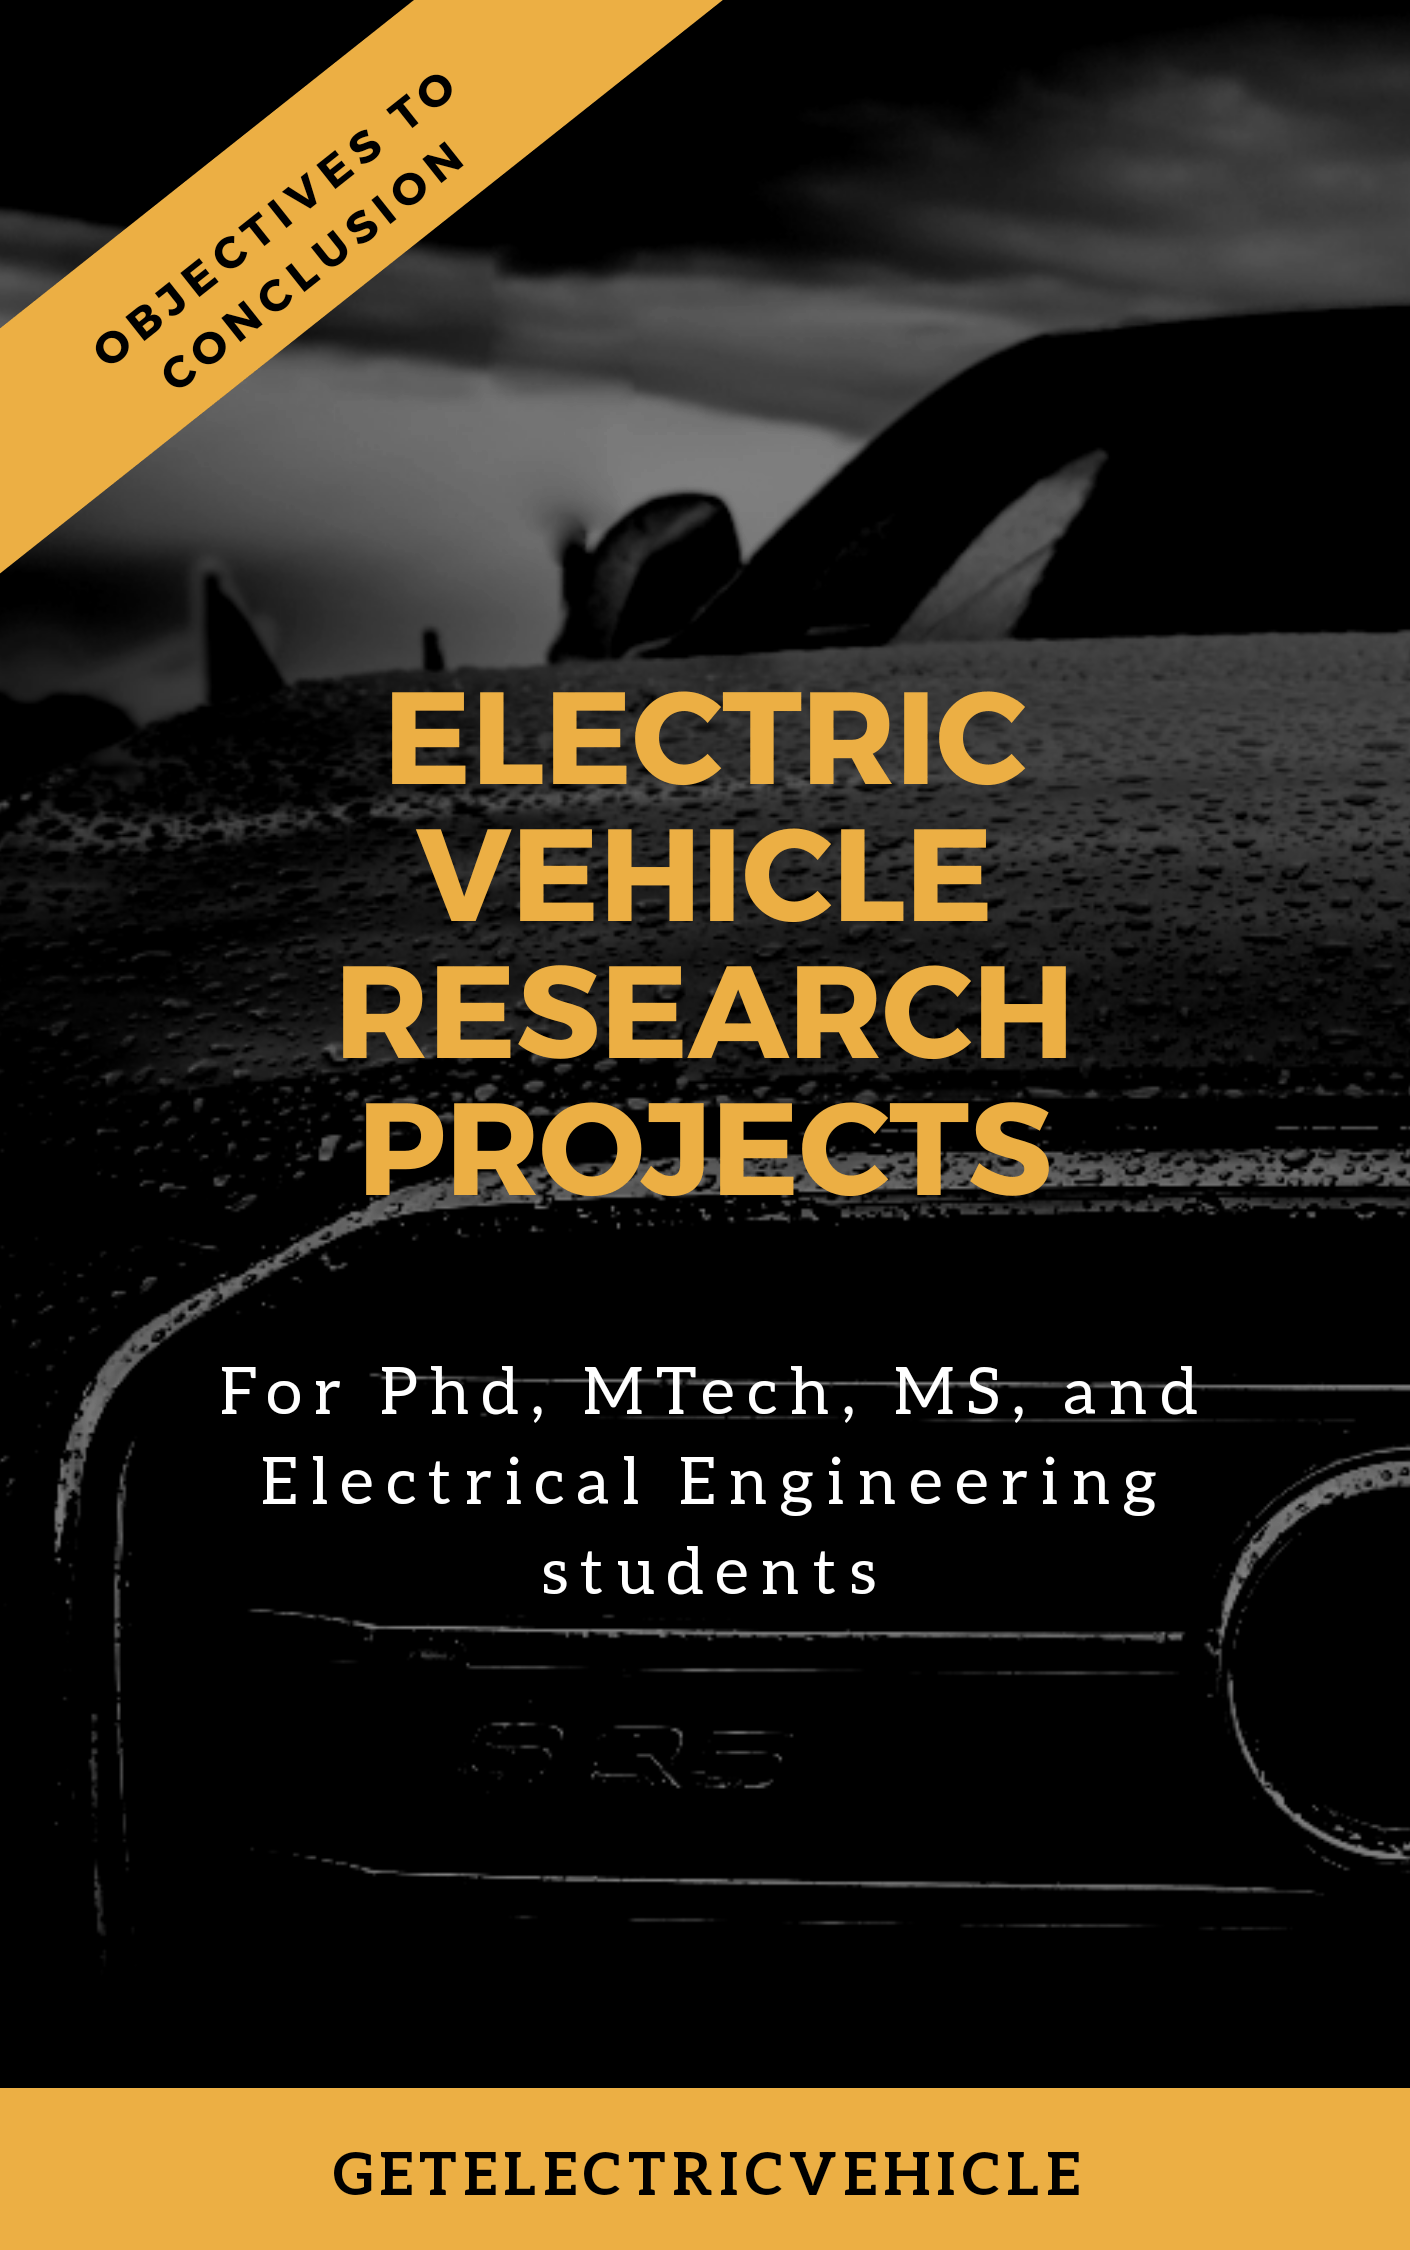 Electric vehicle research projects